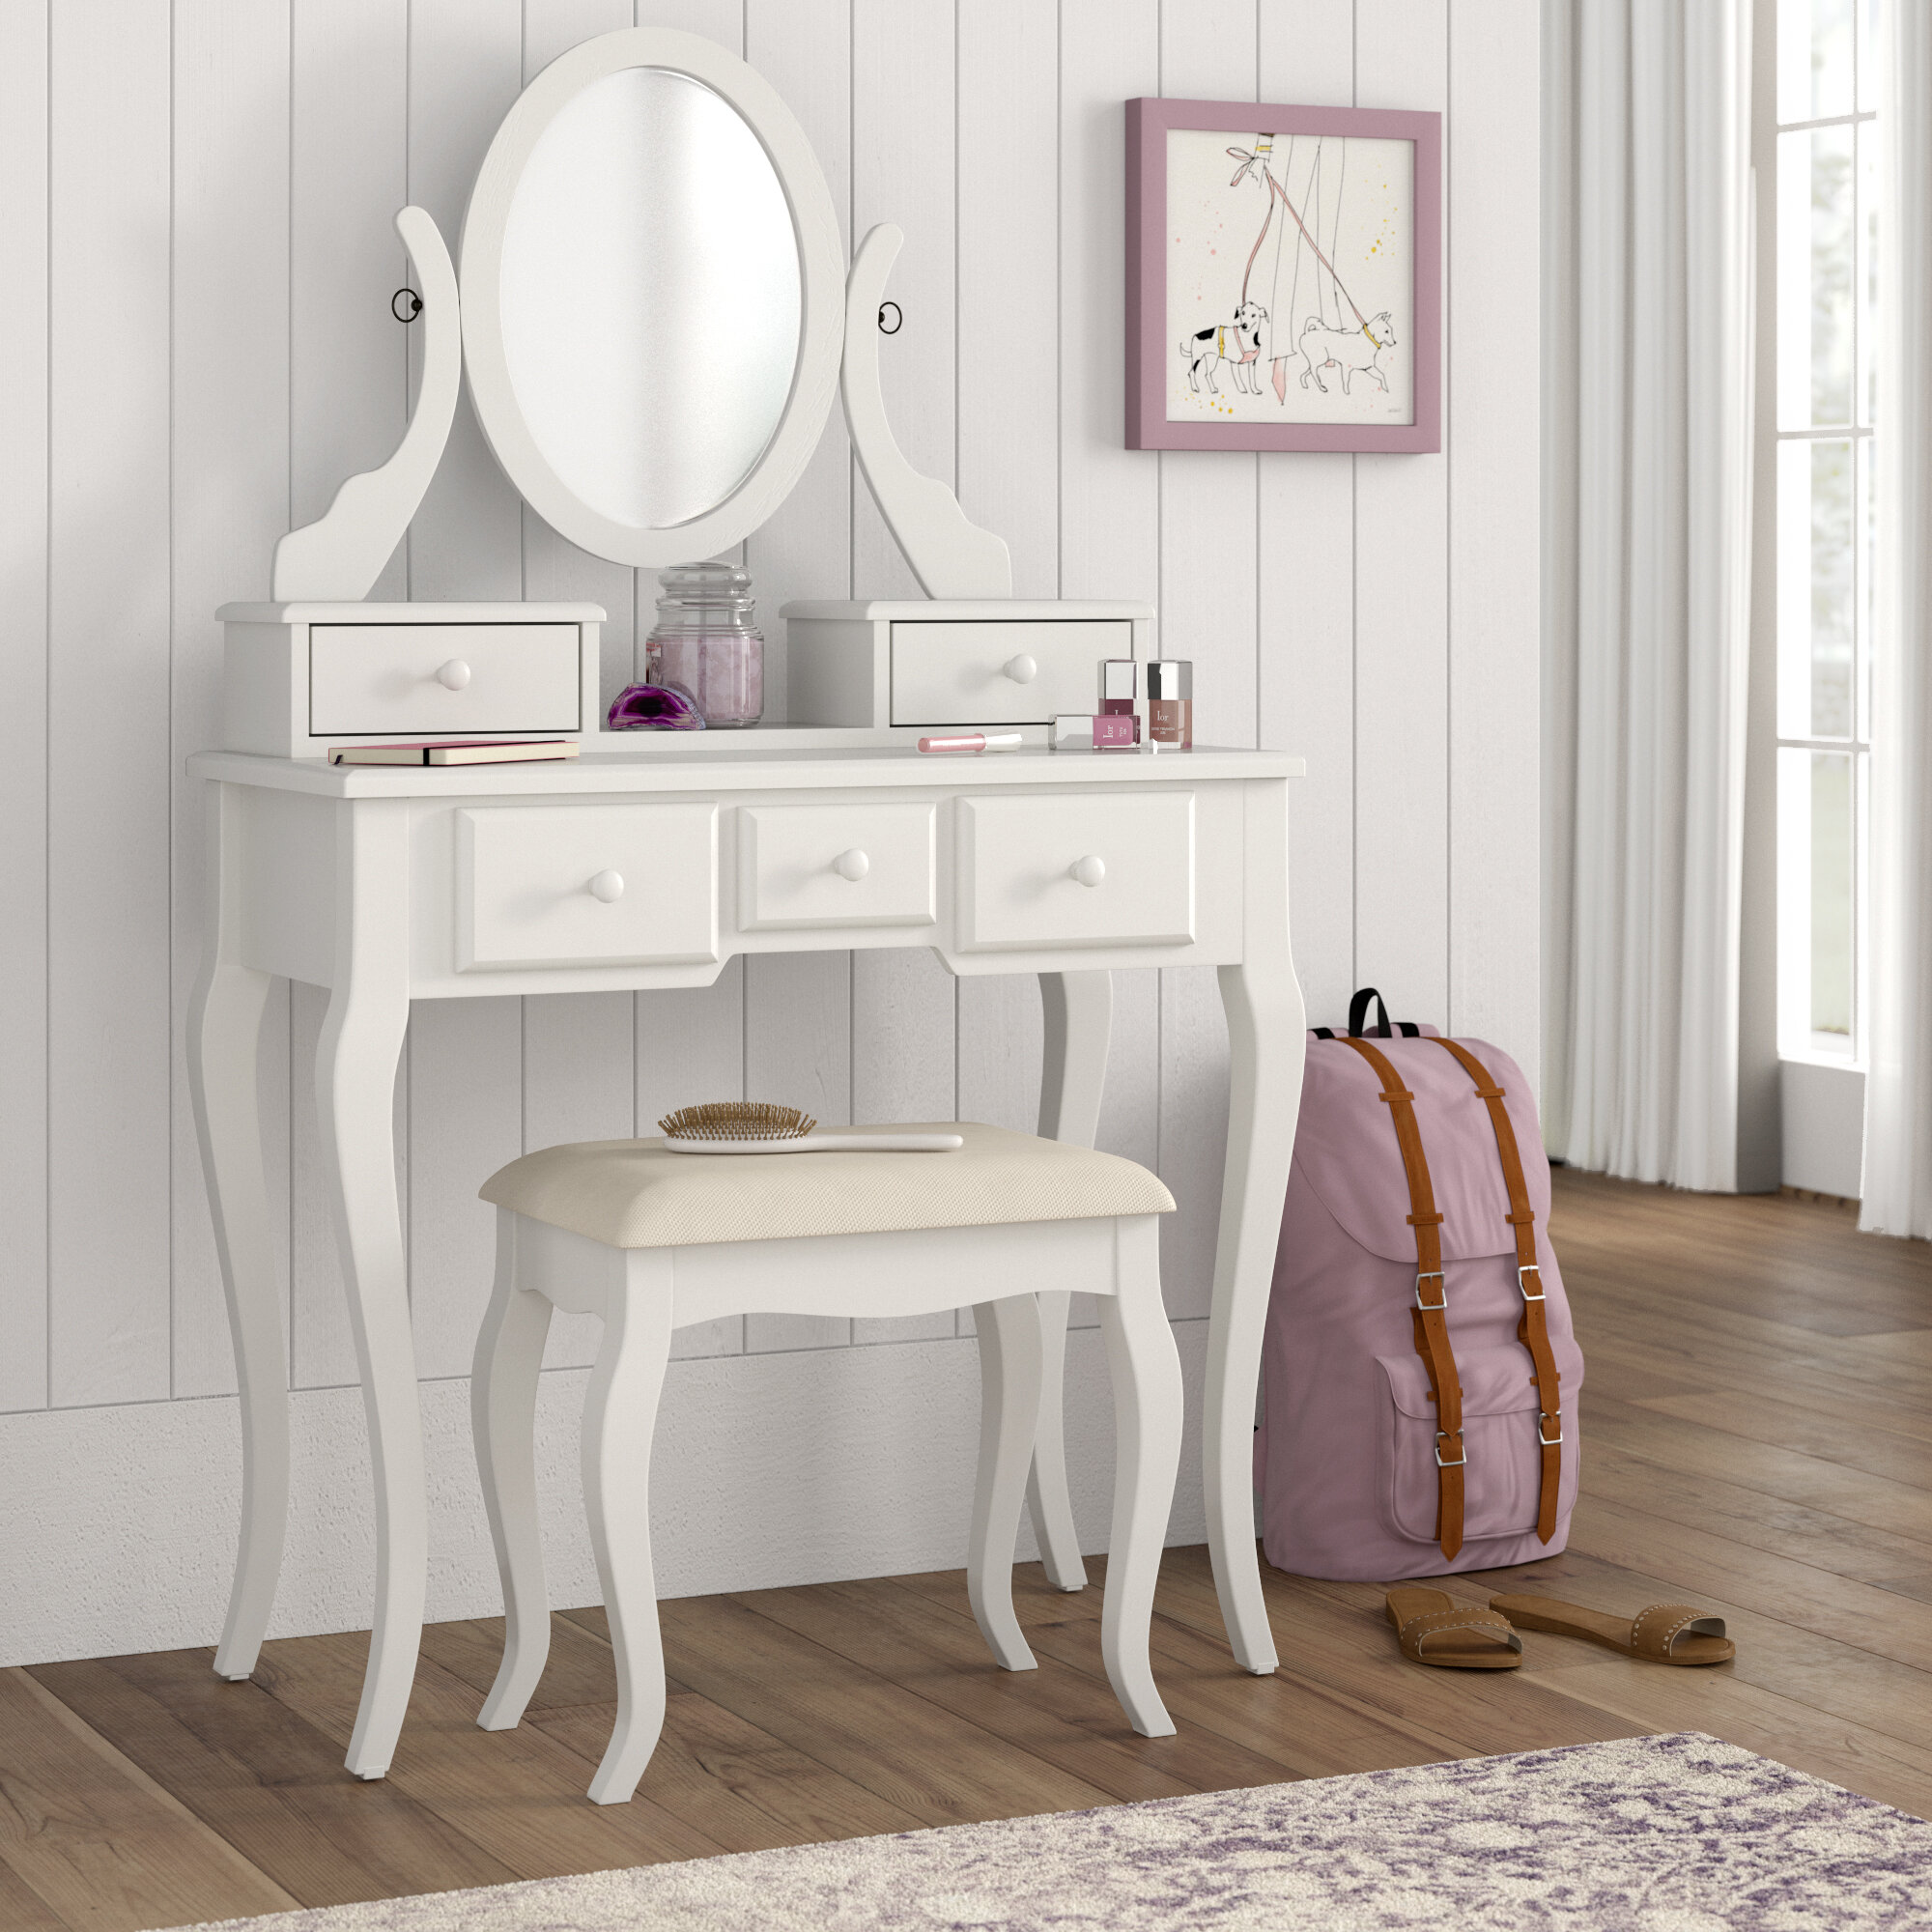 High Street Design Cream Dressing Table/Bedroom Chair with Cabriole Legs and Cushions 36 x 36 x 90 cm Dark Blue 